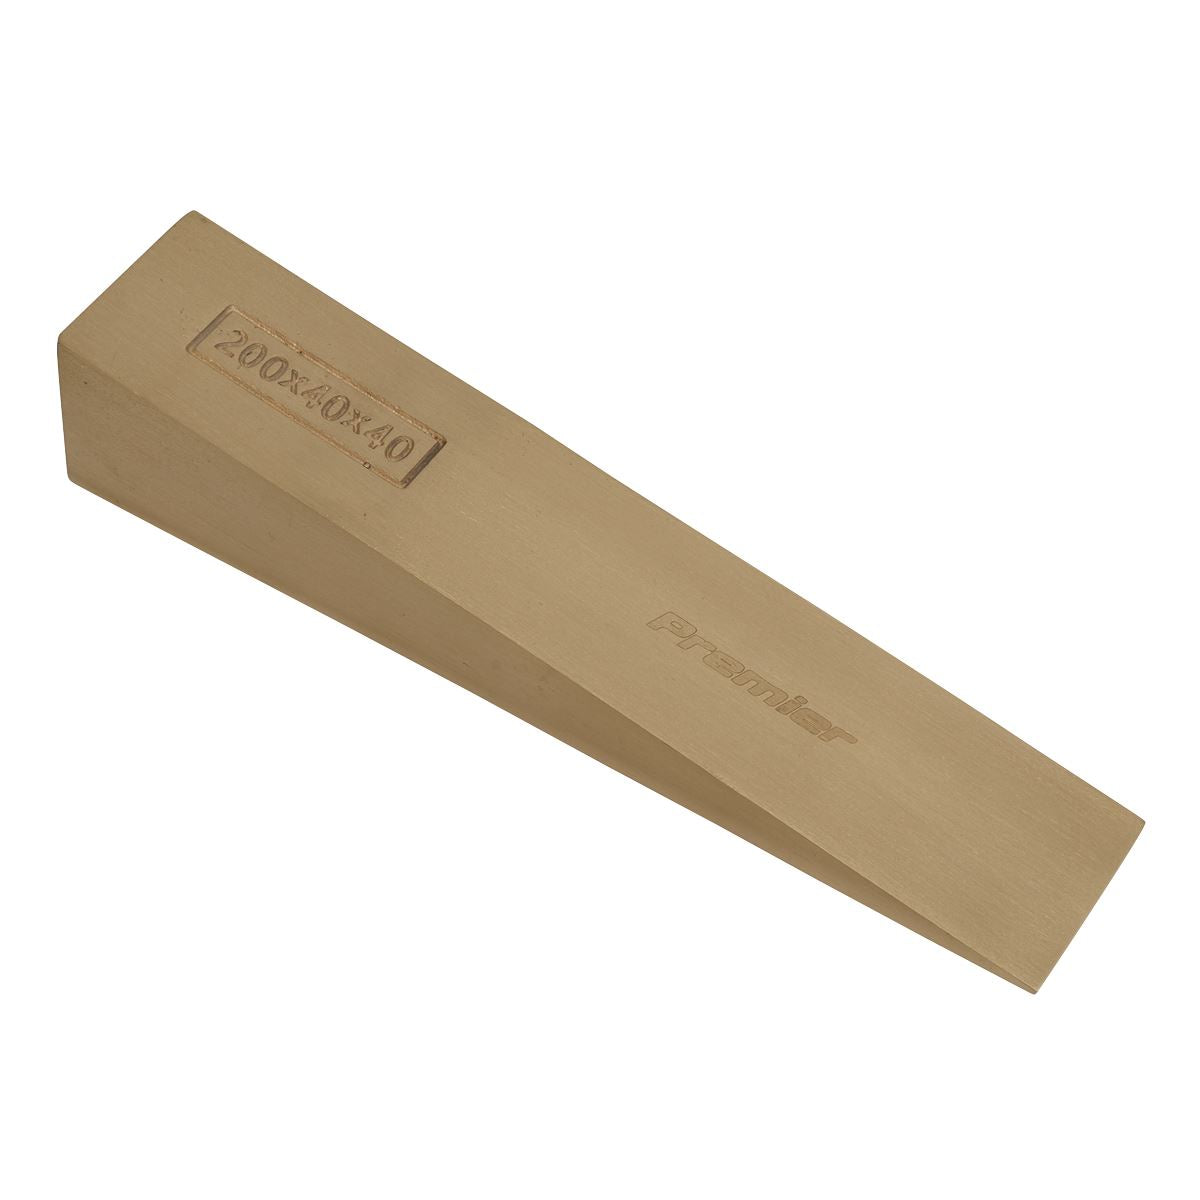 Sealey Premier Wedge 200 x 40 x 40mm - Non-Sparking